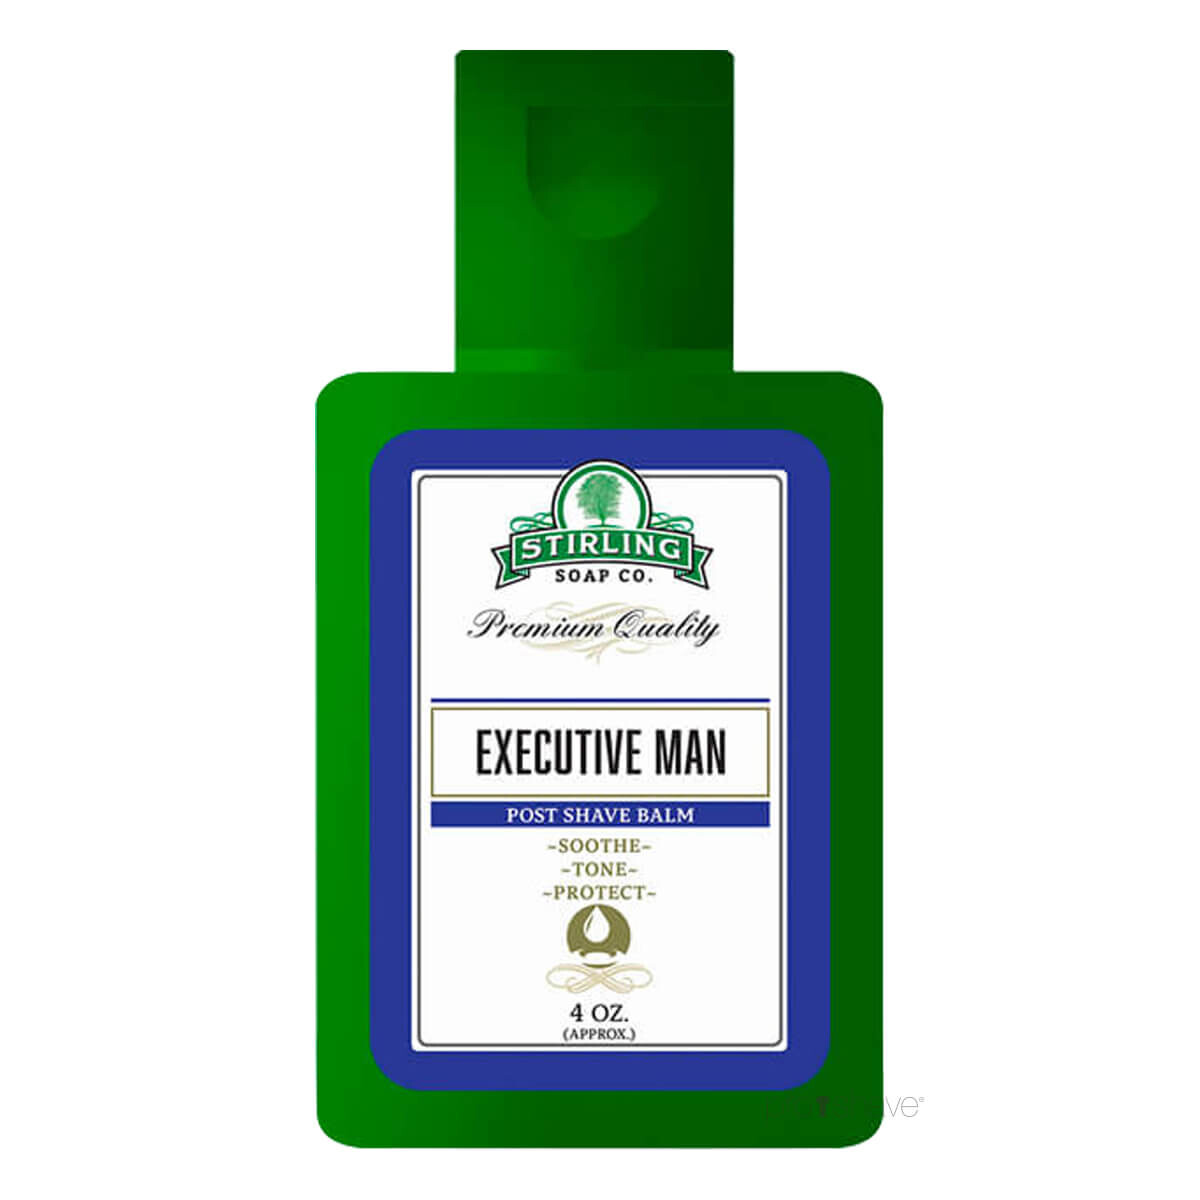 Stirling Soap Co. Aftershave Balm, Executive Man, 118 ml.